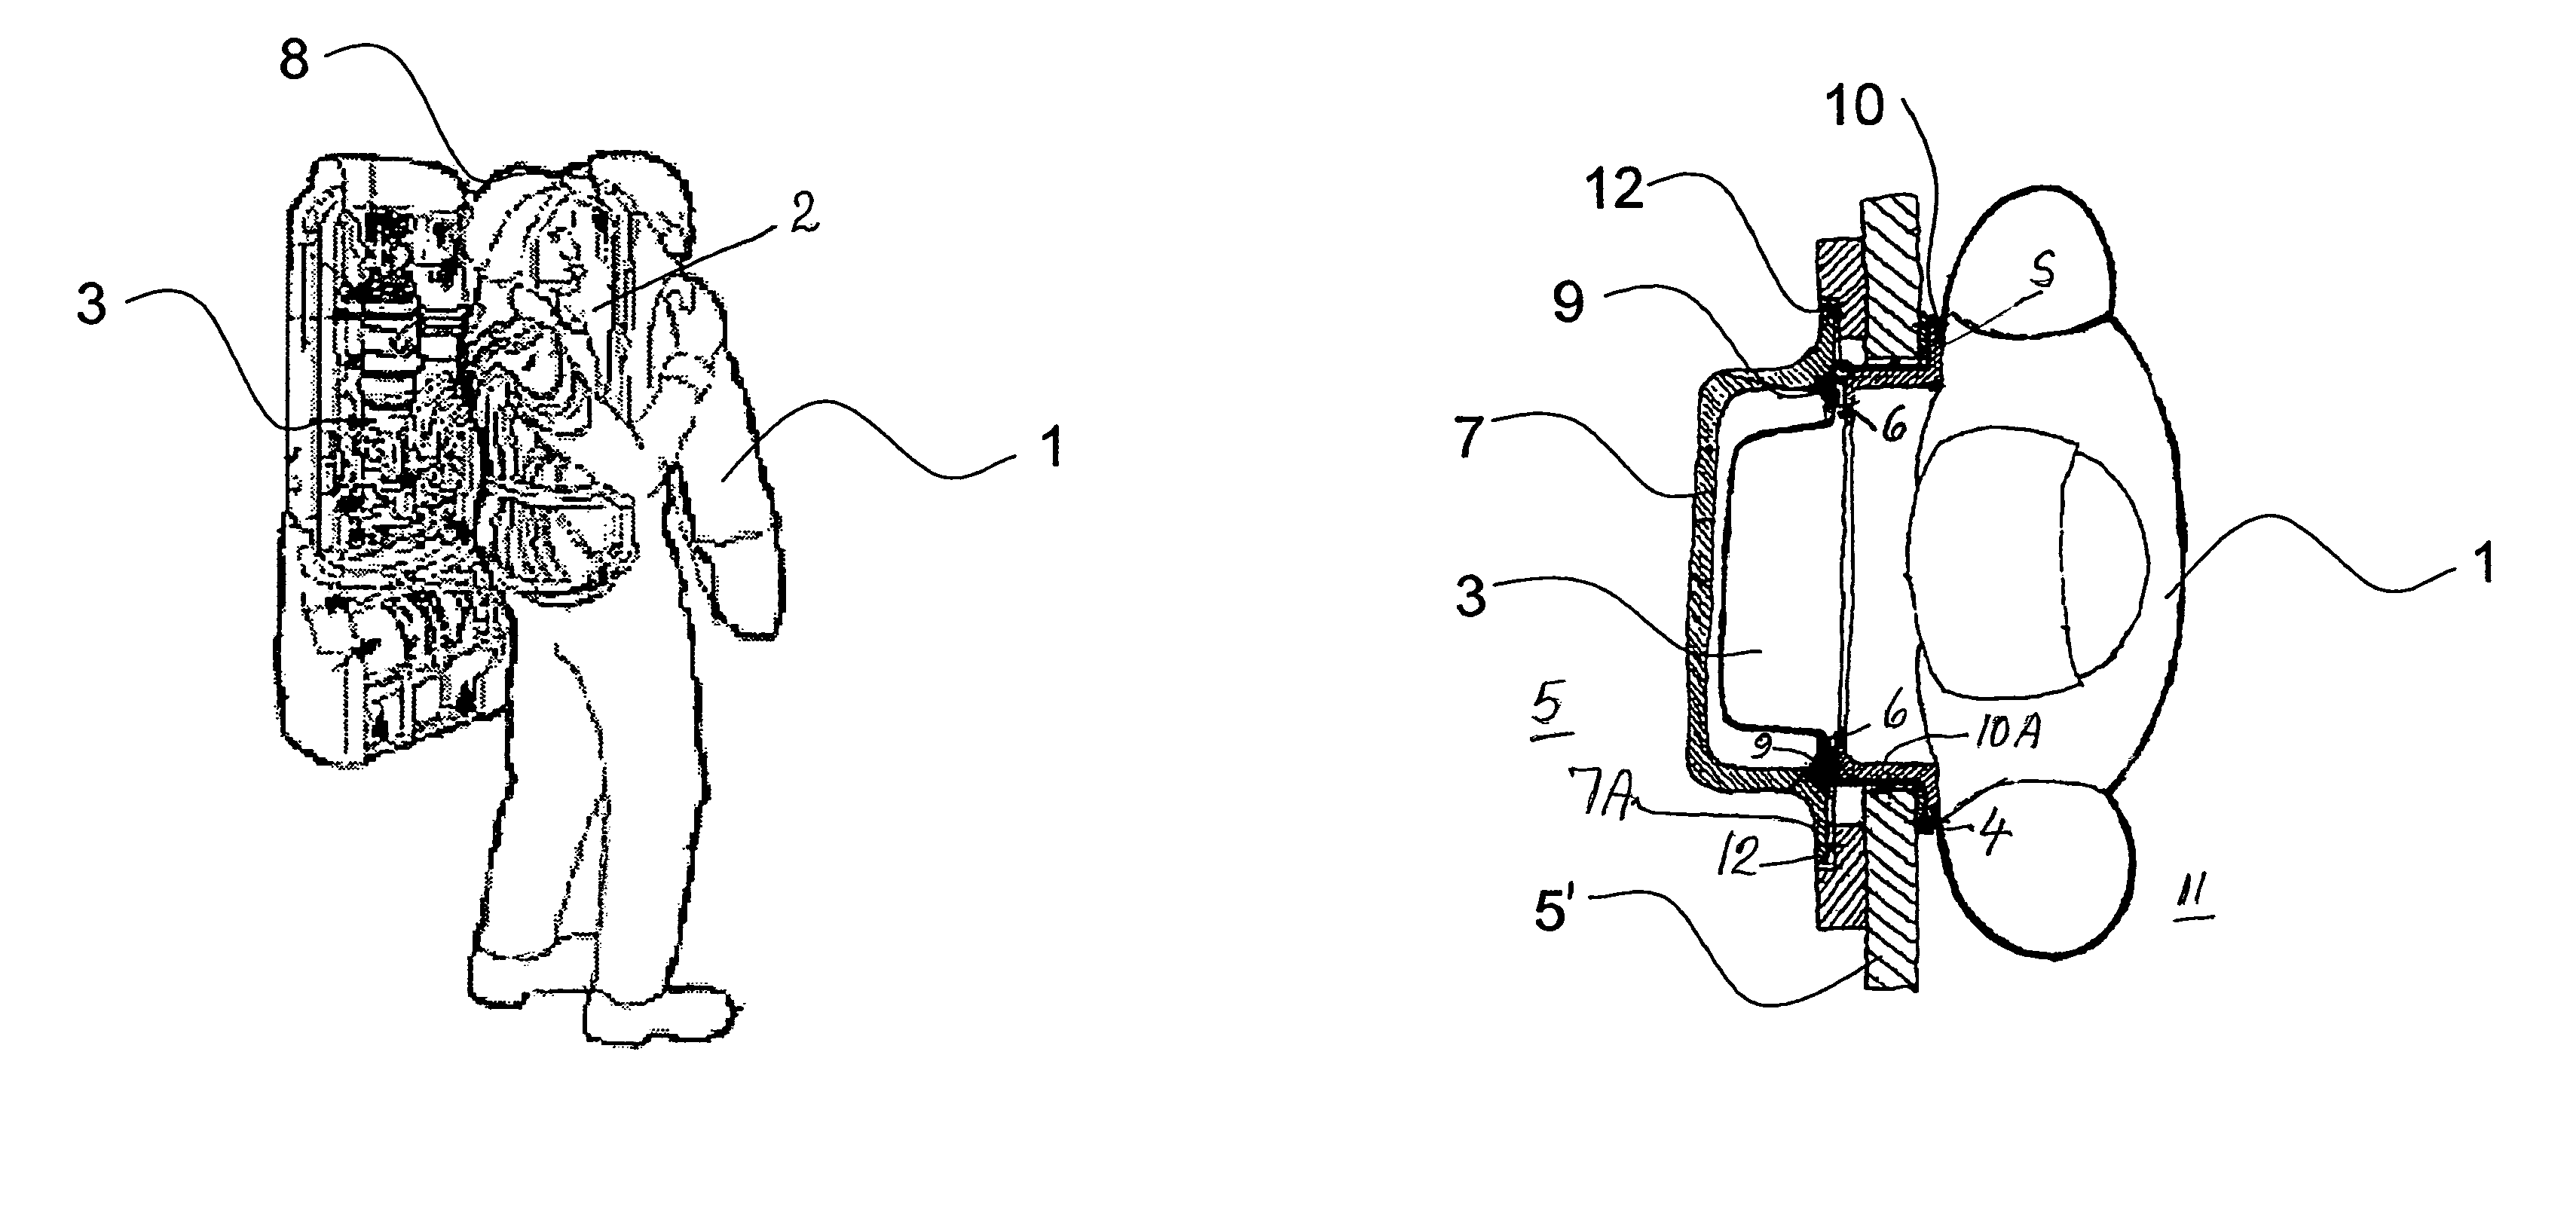 Apparatus and method for putting on a protective suit